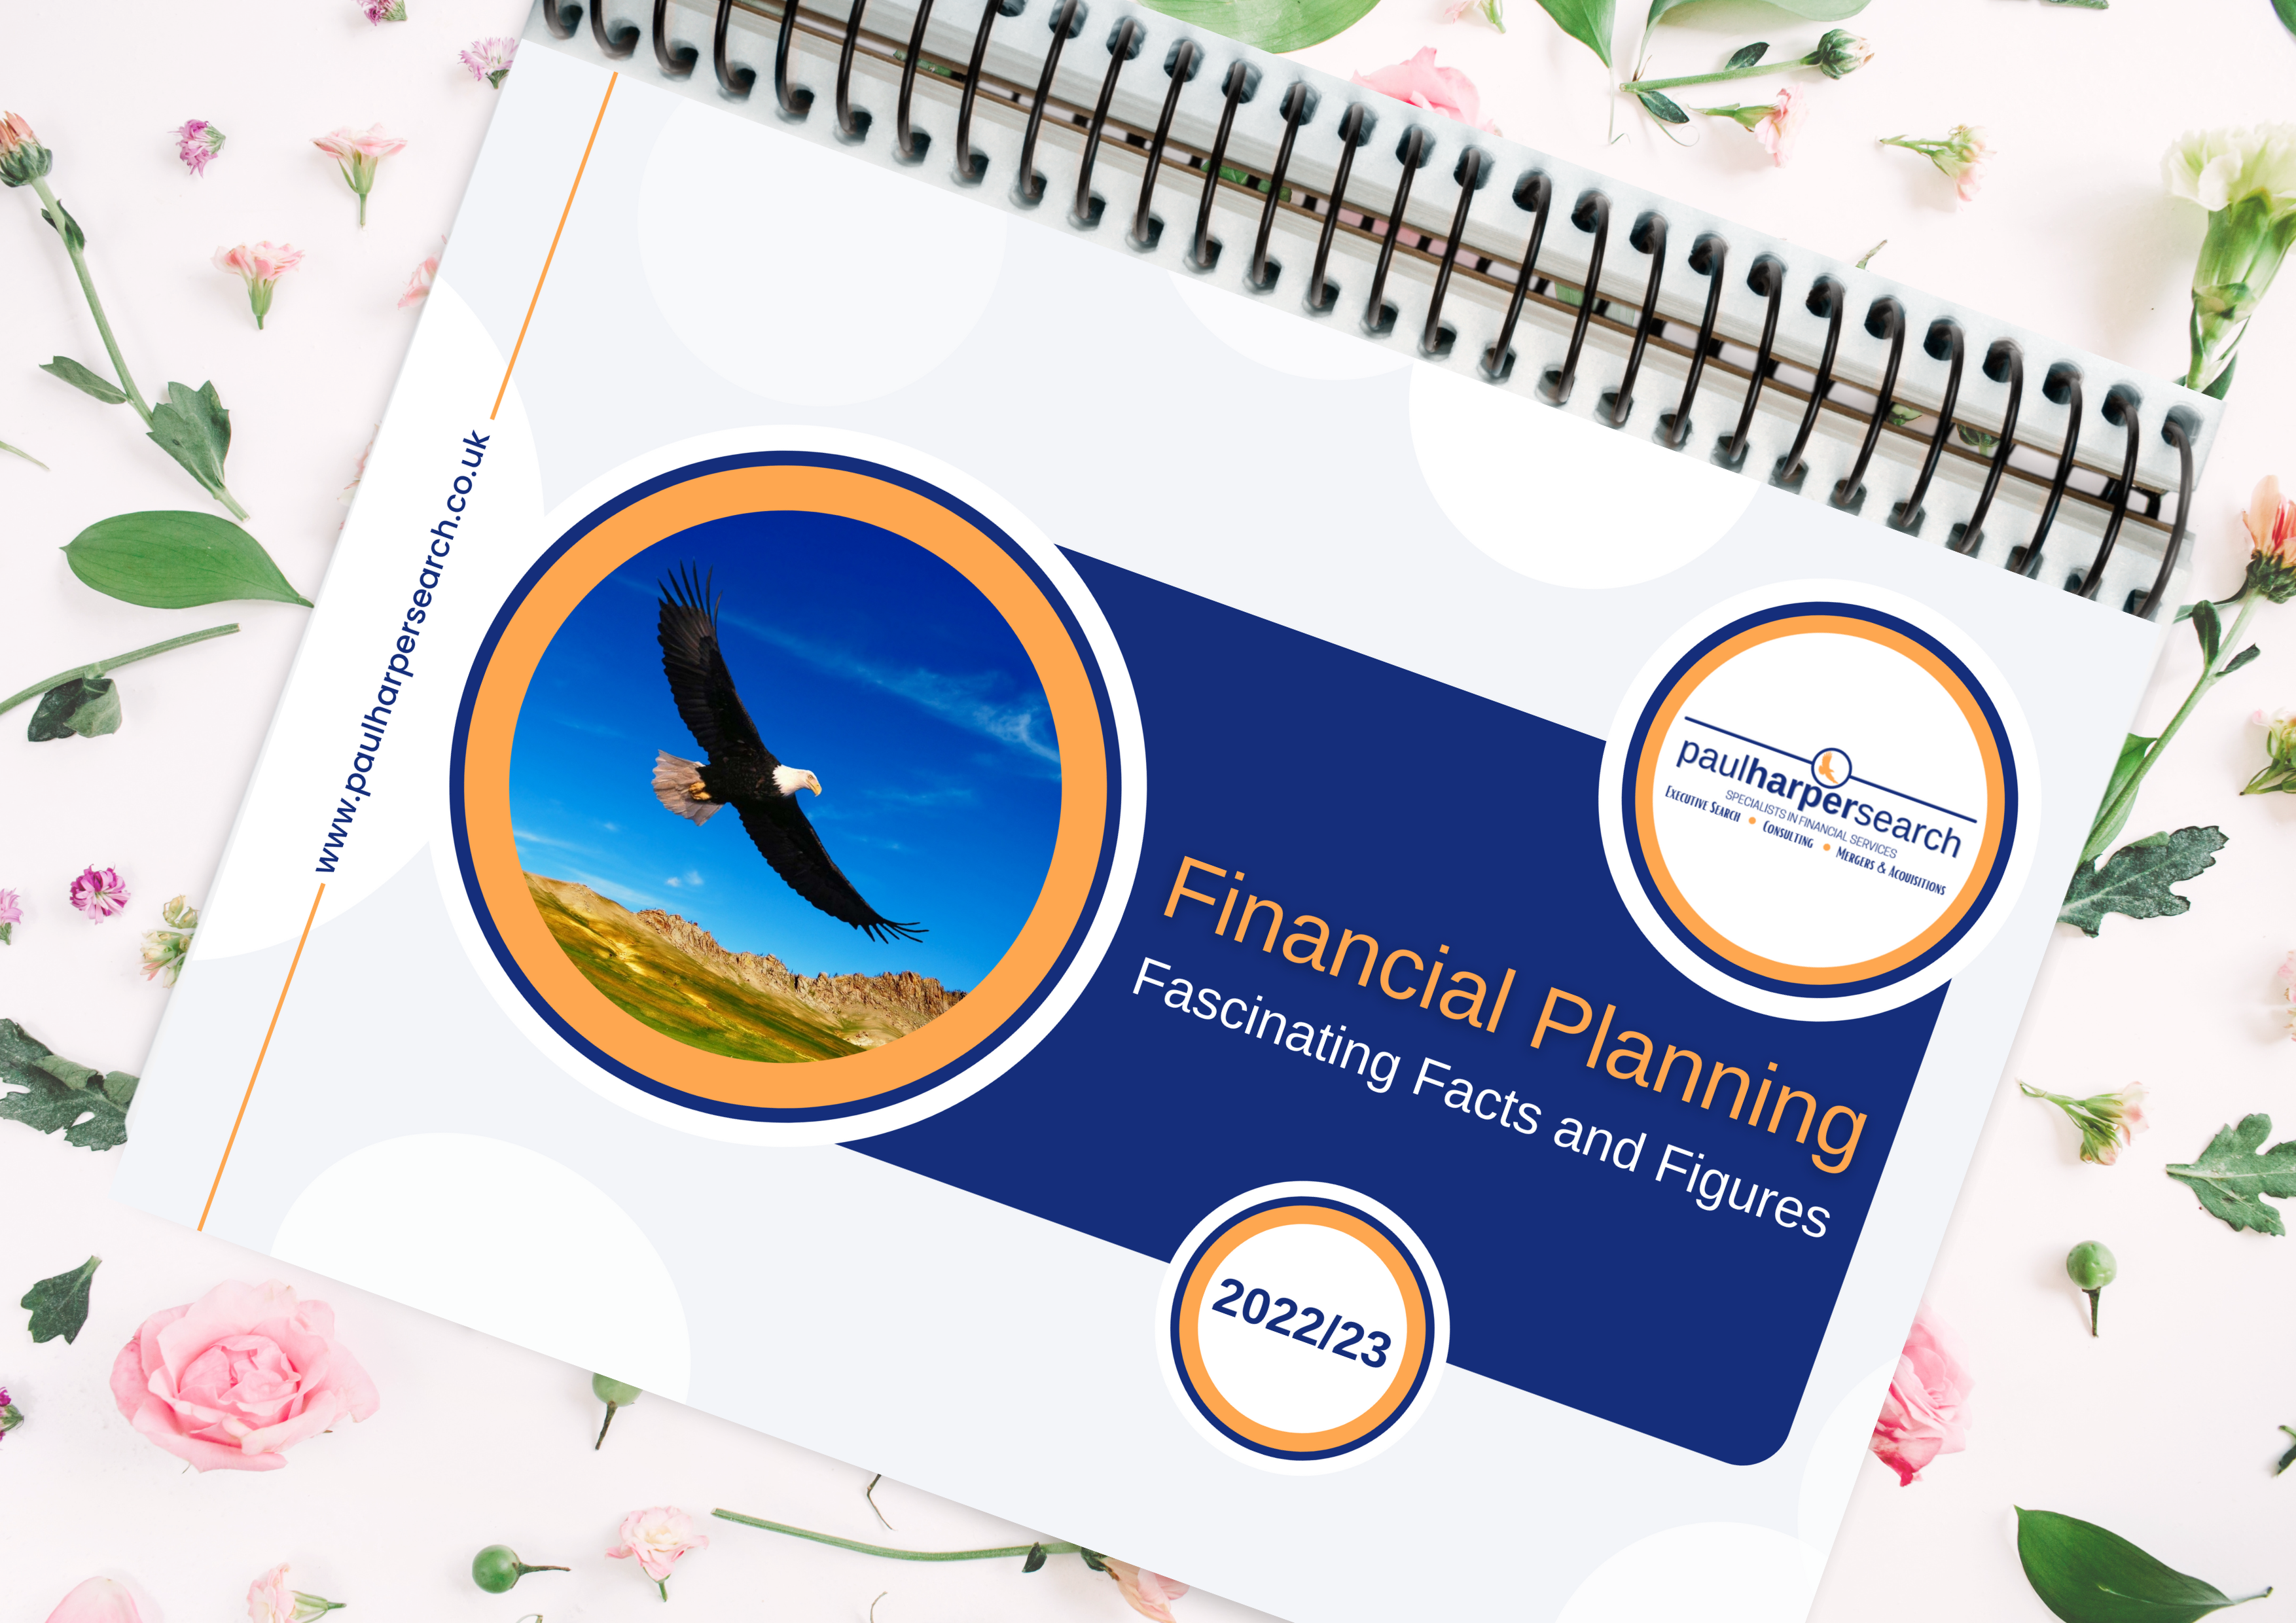 2022/23 Financial Planning - Fascinating Facts & Figures